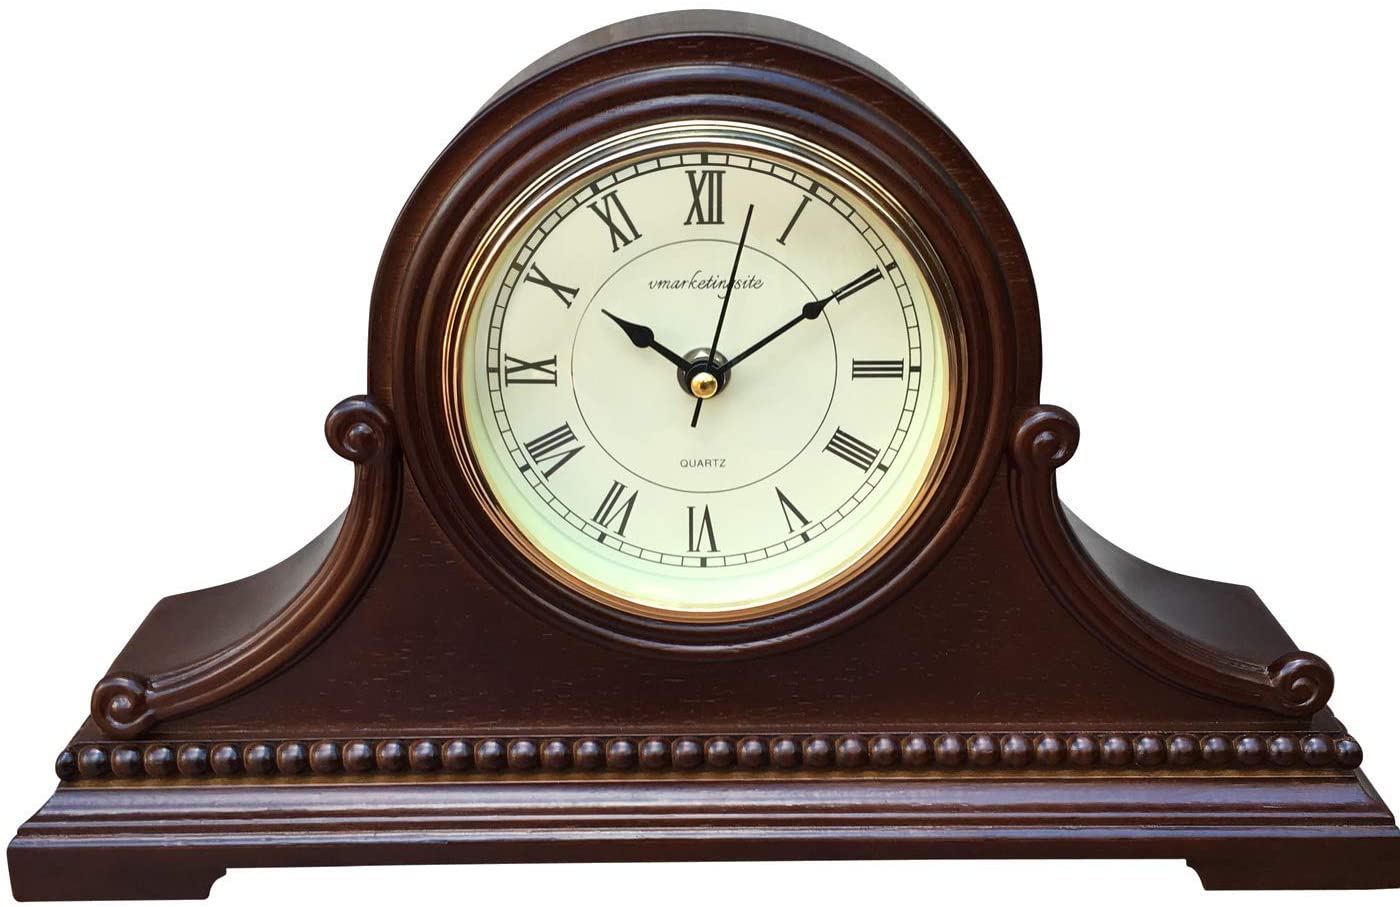 Mantel Clocks Vmarketingsite With Westminster Chimes Decorative Roman Numerals USA